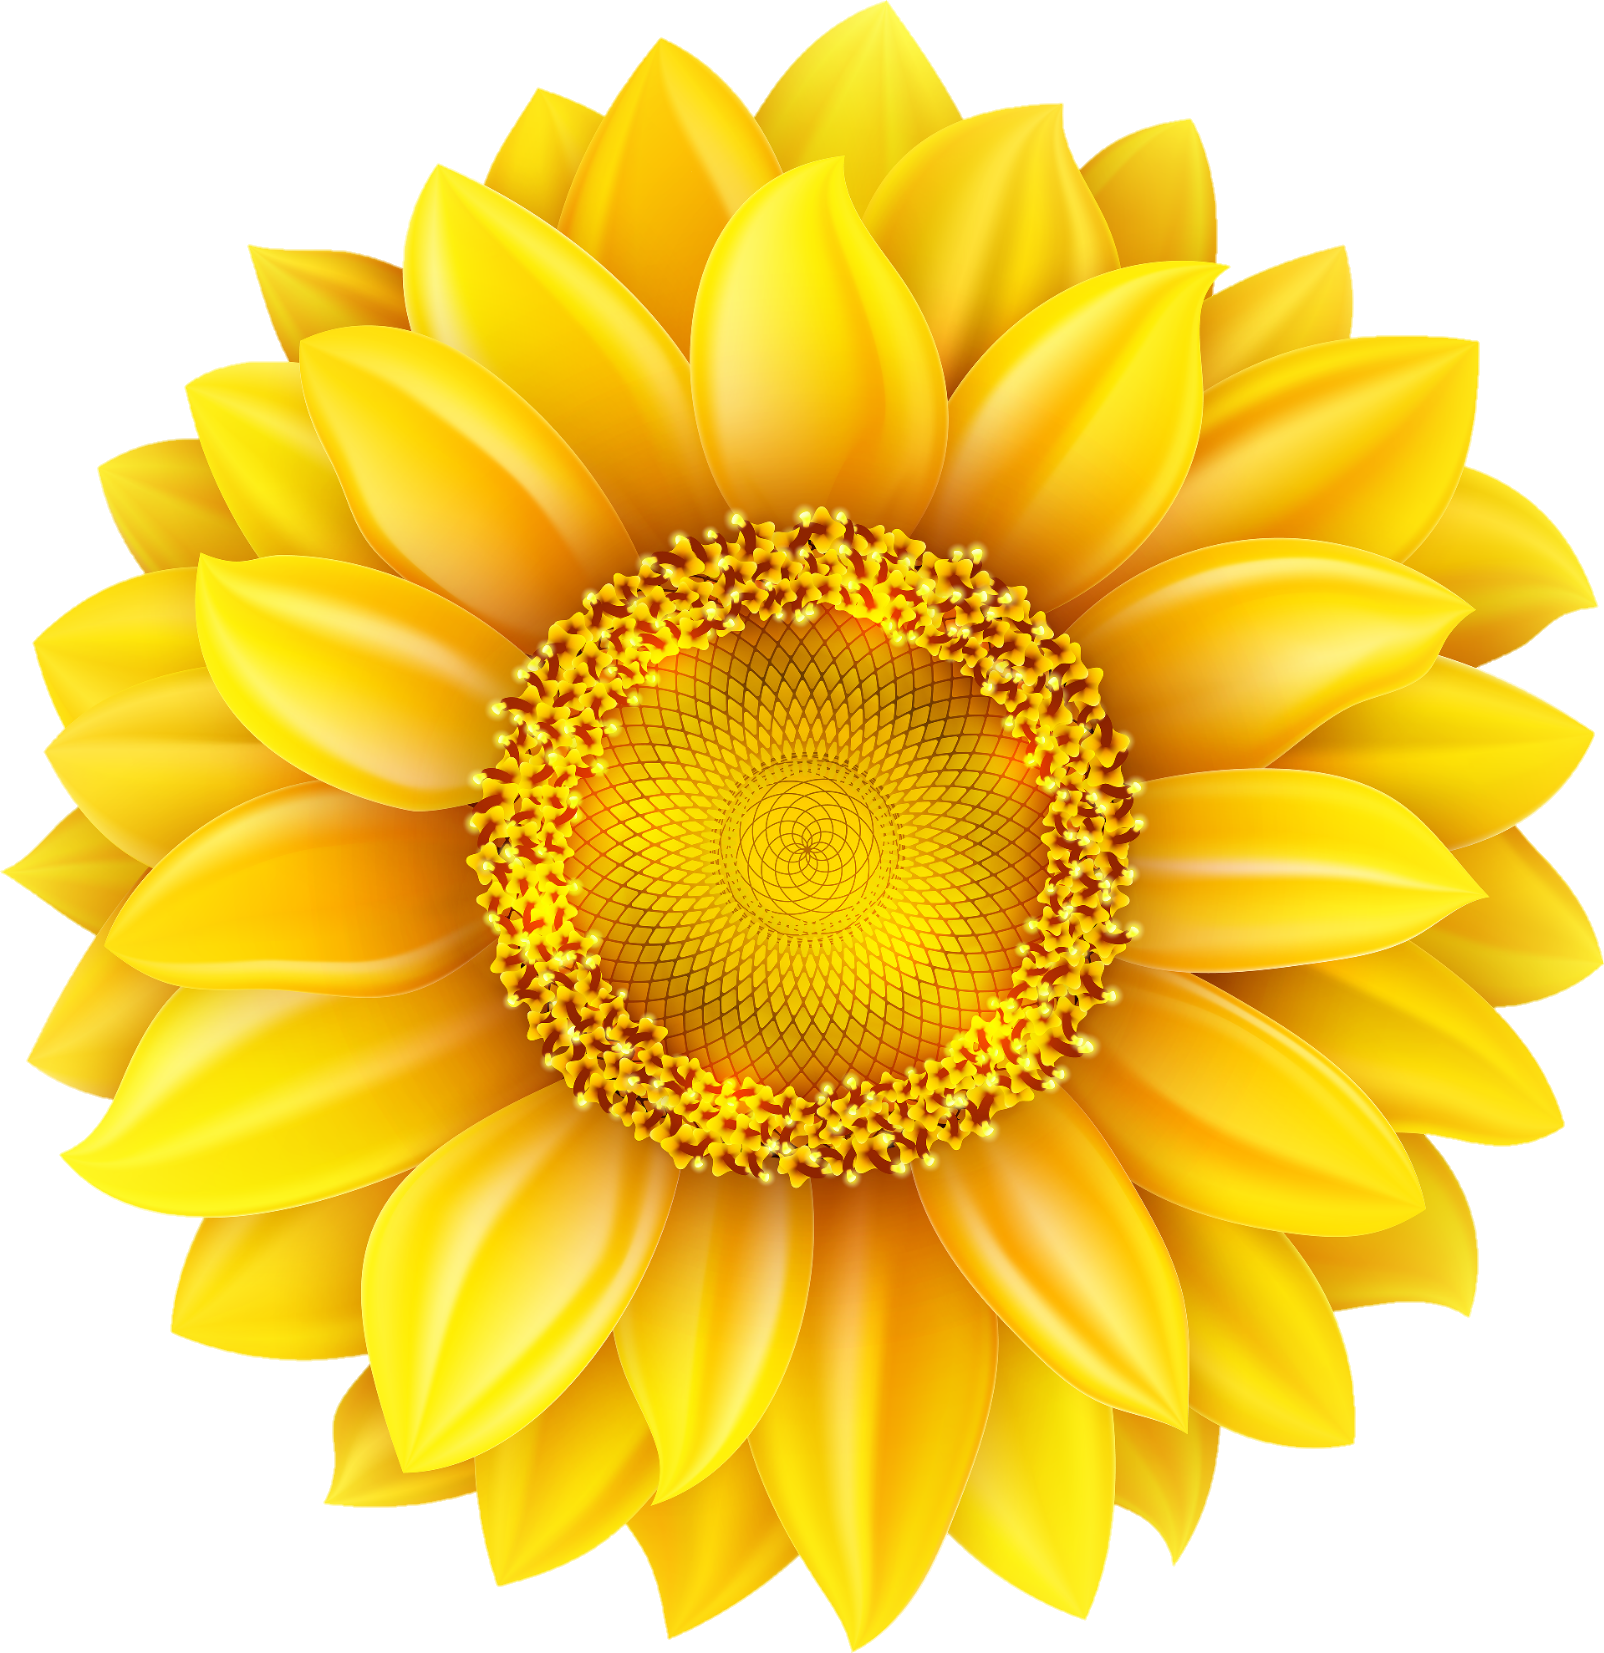 sunflower-png-image-from-pngfre-3-1